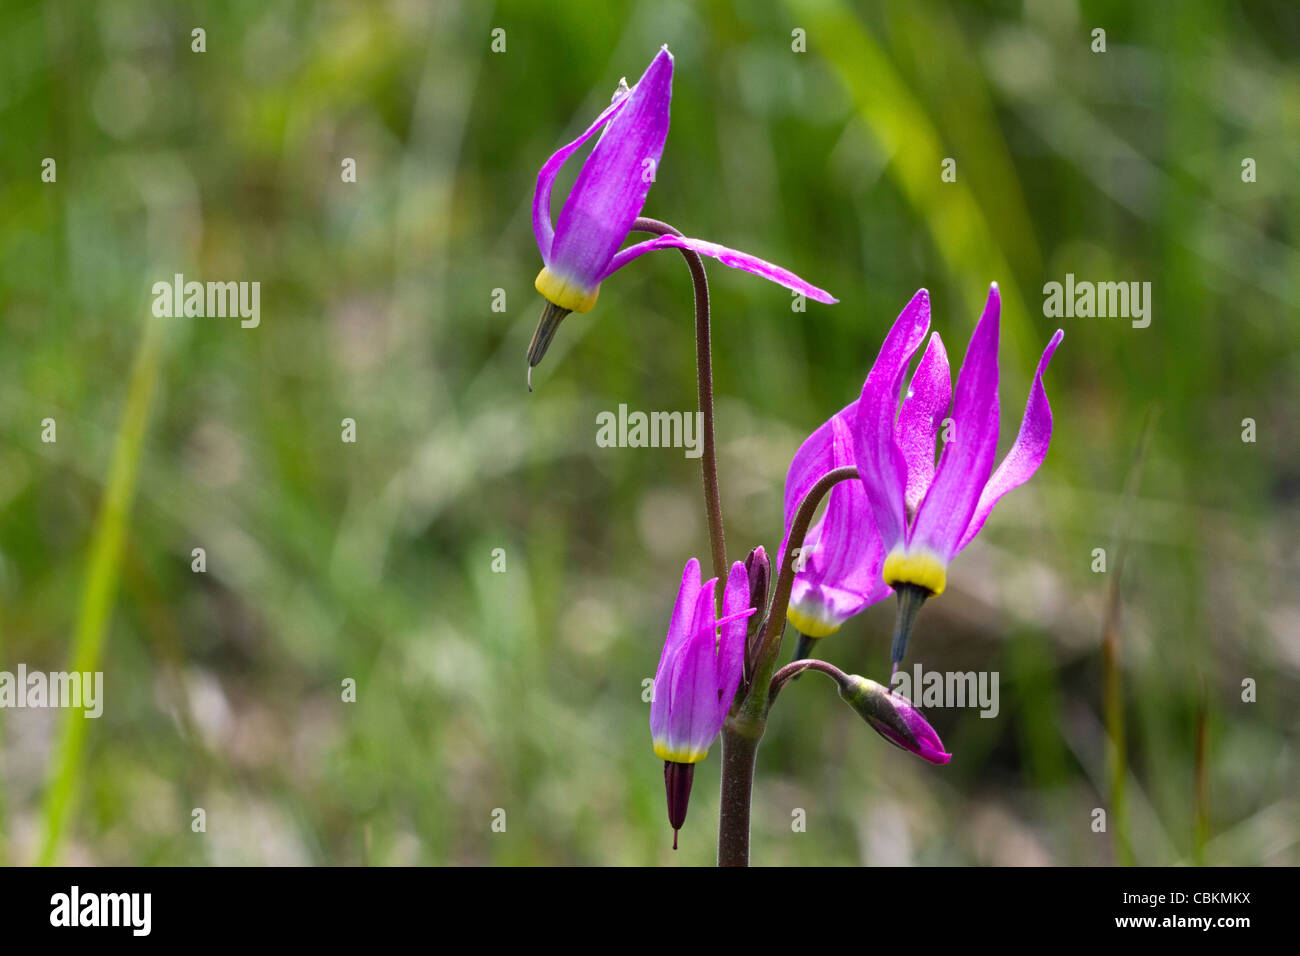 Shooting Star Flower High Resolution Stock Photography And Images Alamy